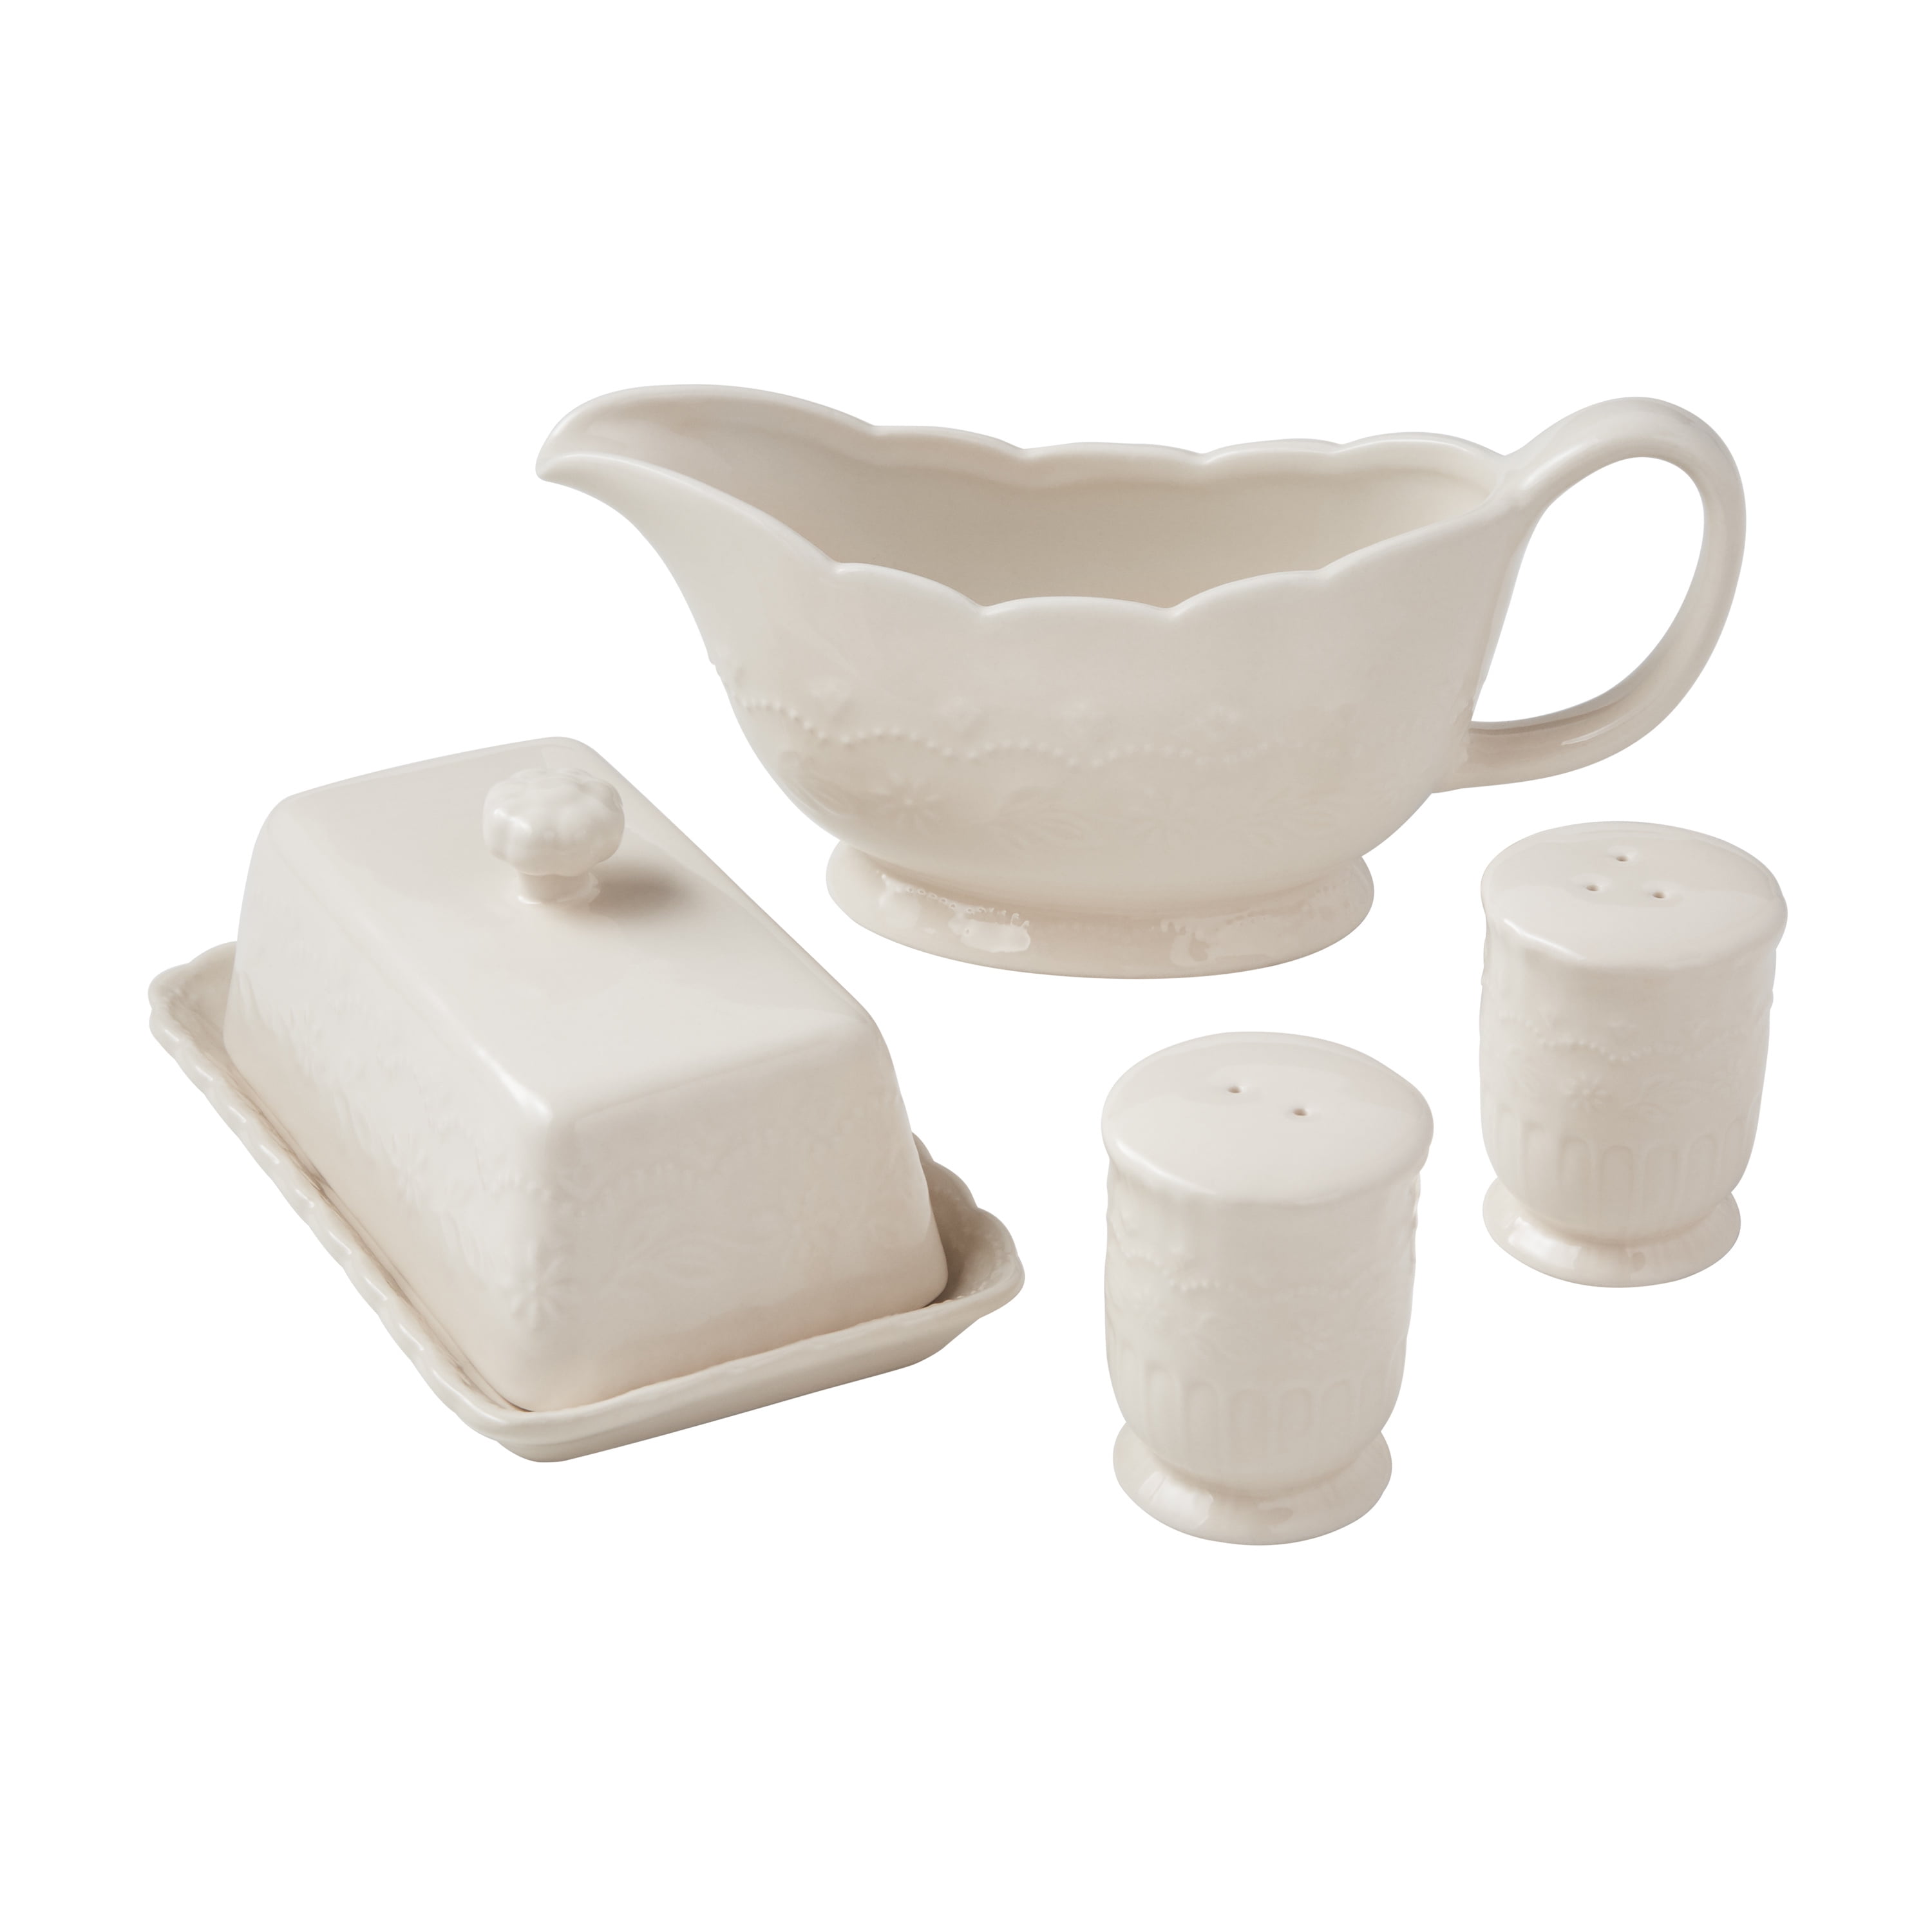 Elegant Farmhouse Butter Dish with Gravy Boat and Salt & Pepper Shakers Set 